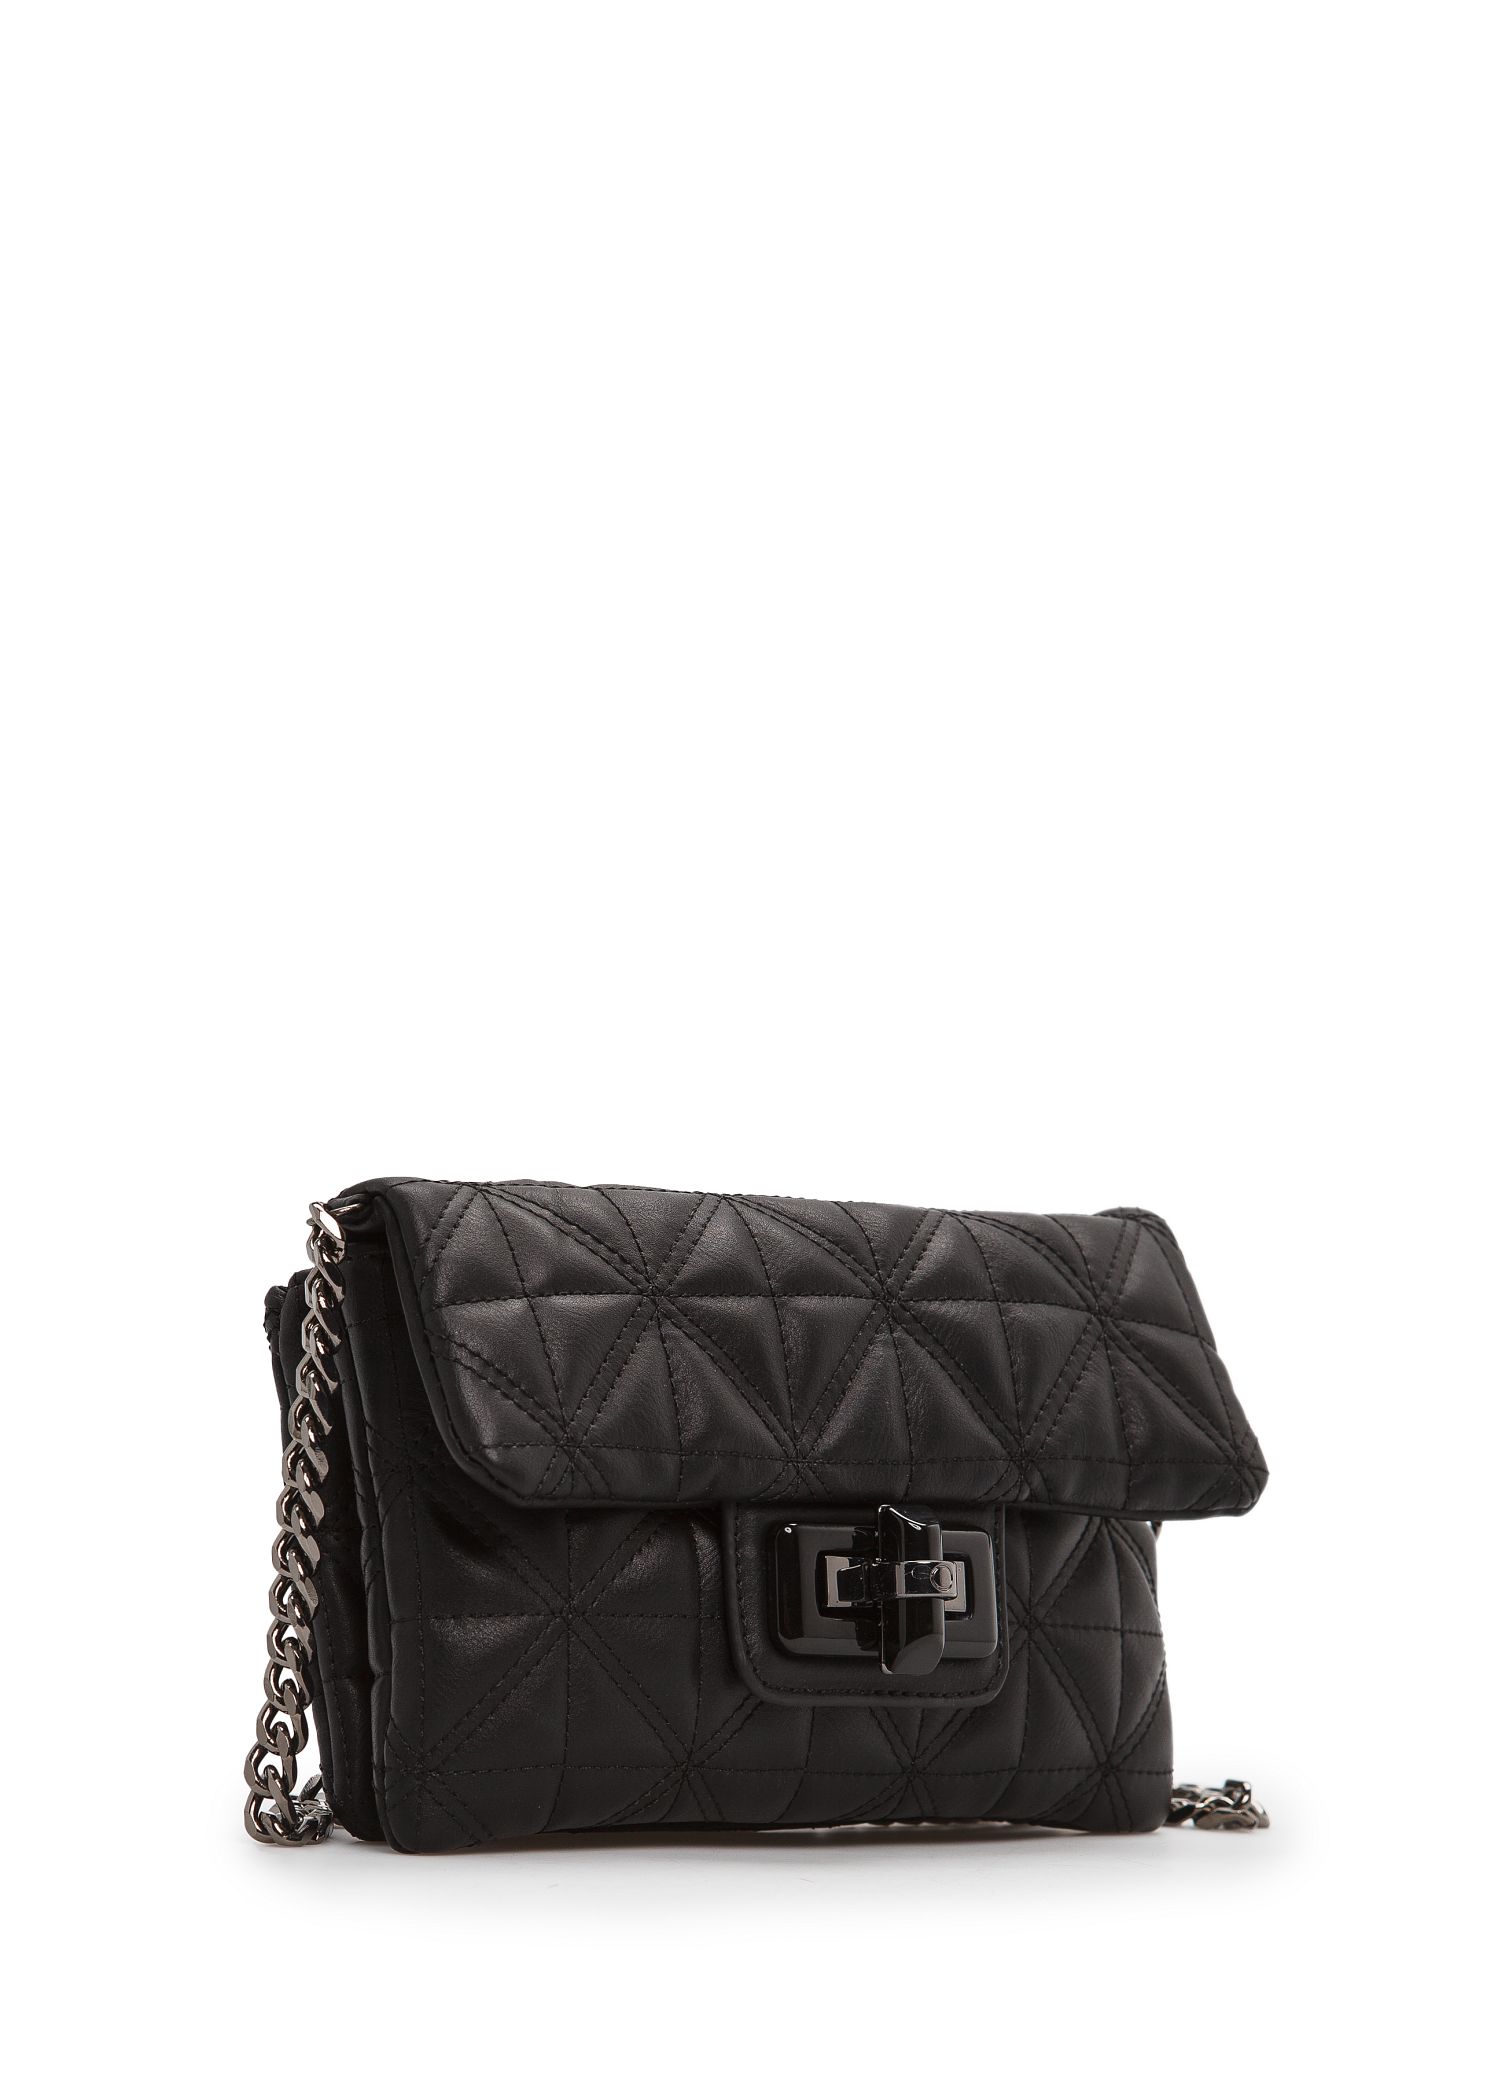 Lyst - Mango Quilted Small Shoulder Bag in Black